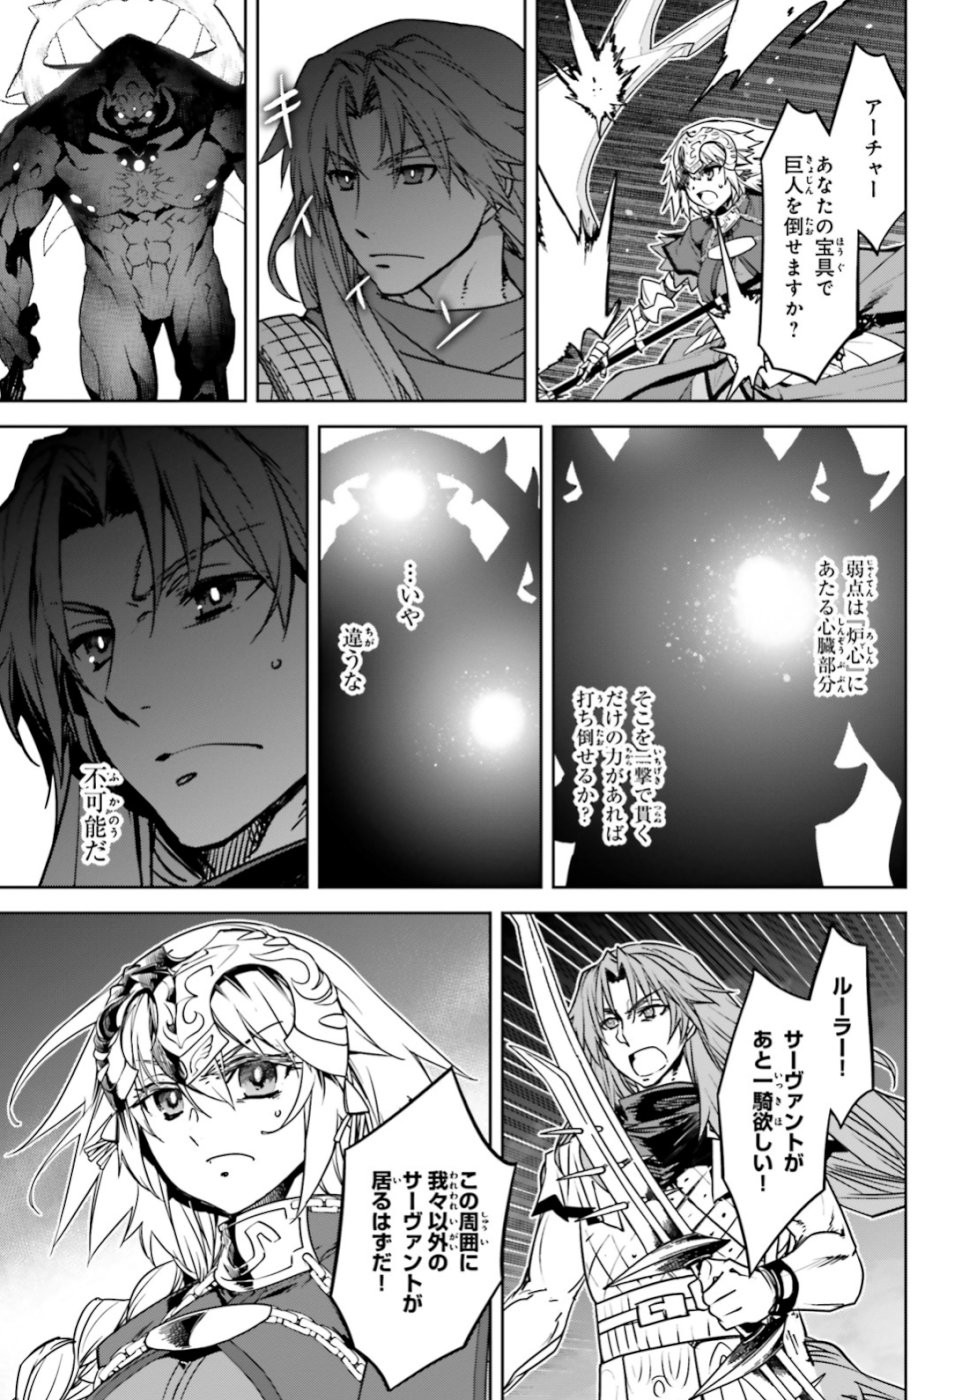 Fate-Apocrypha - Chapter 35 - Page 15